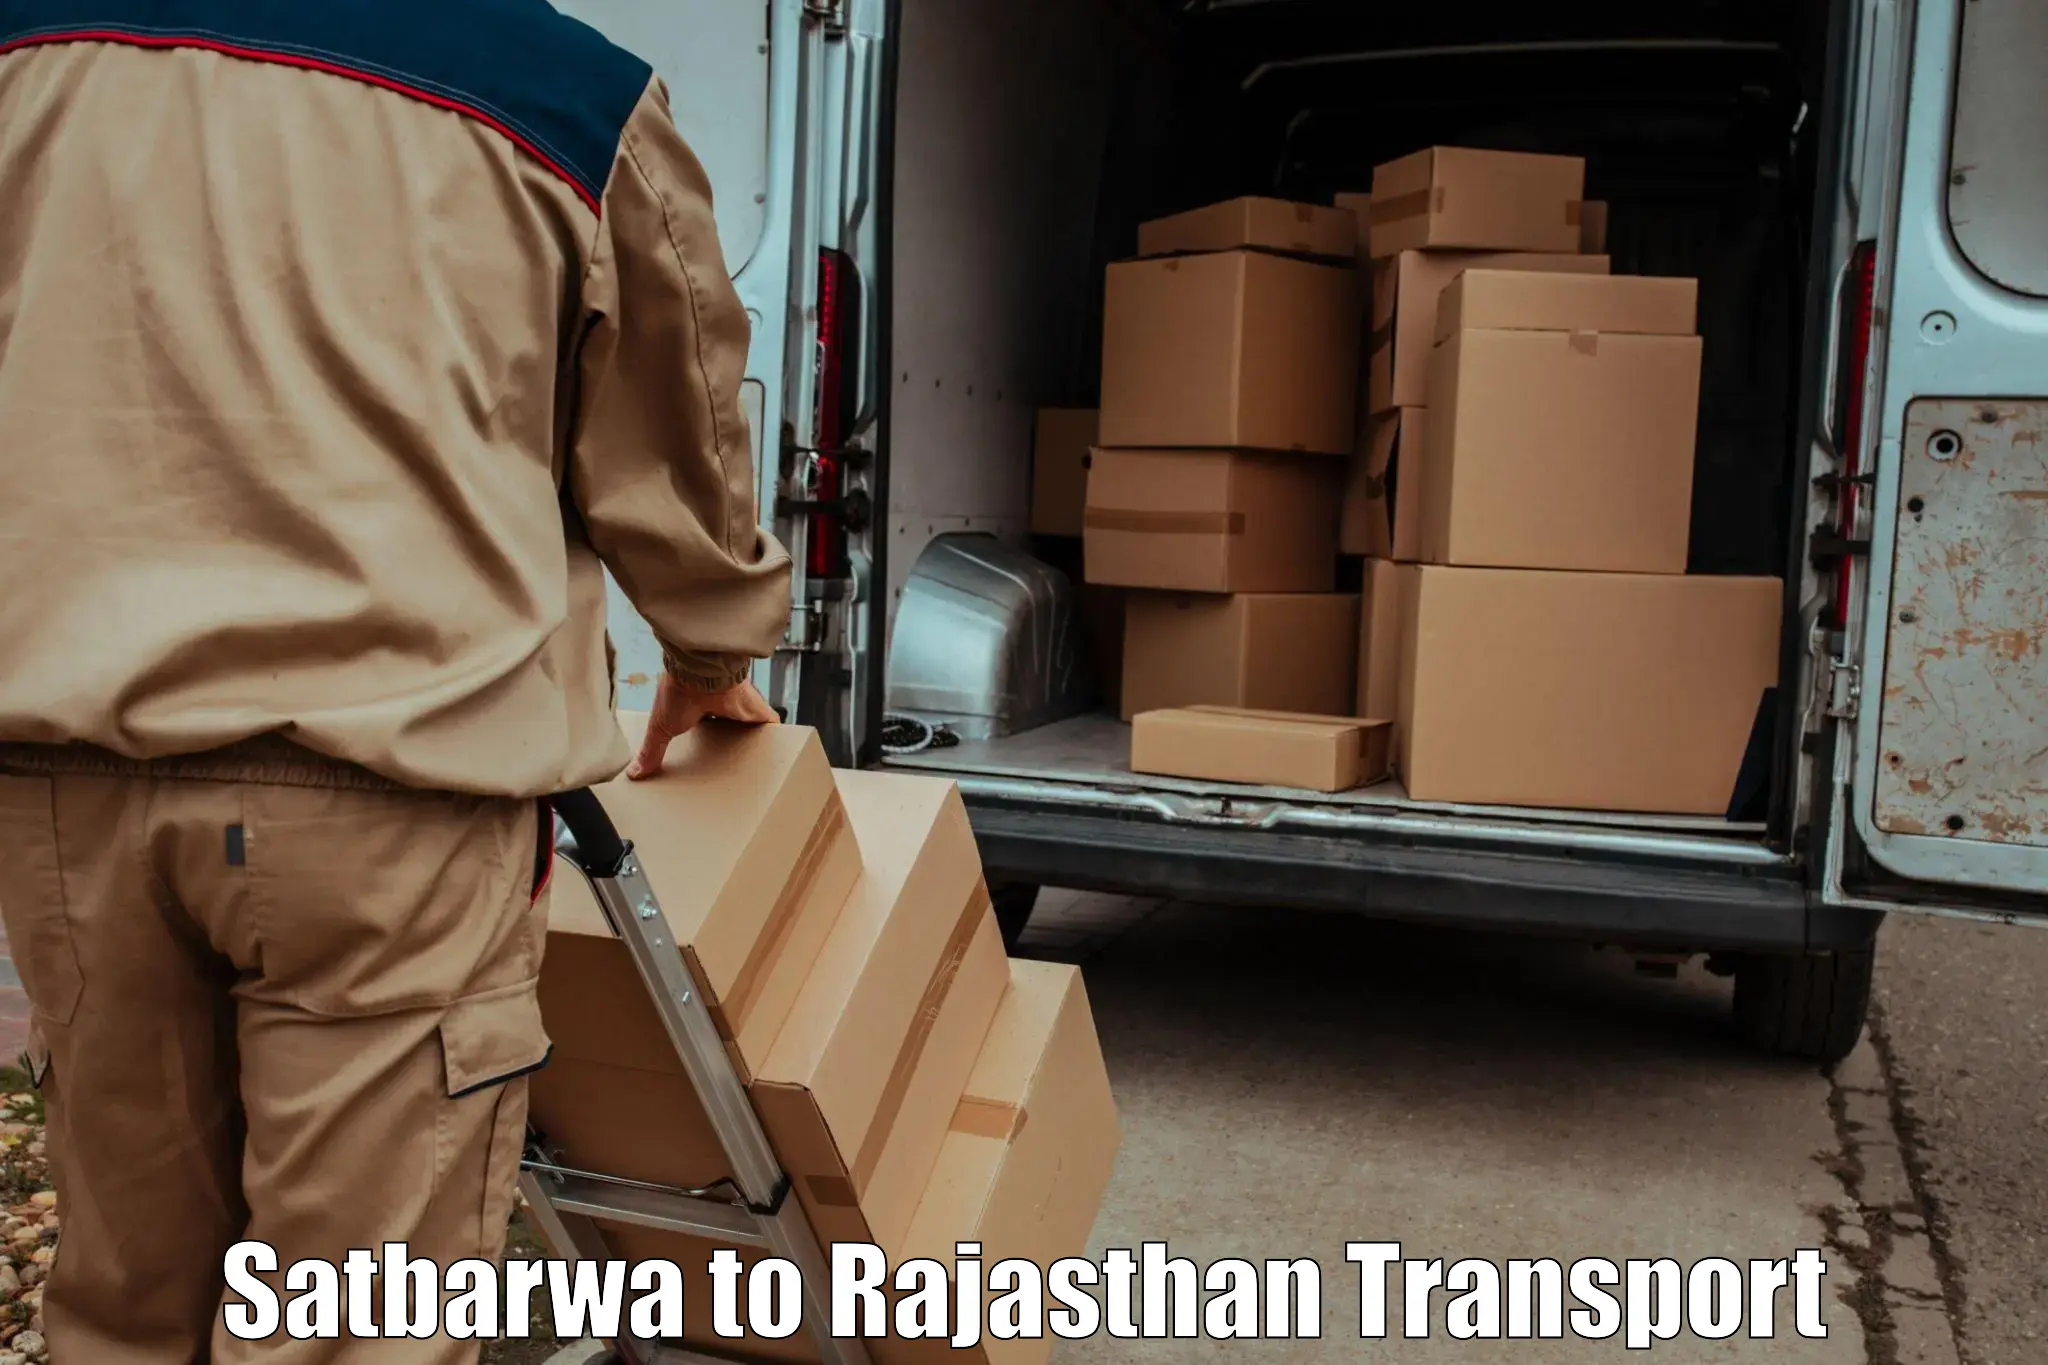 Vehicle parcel service Satbarwa to Piparcity